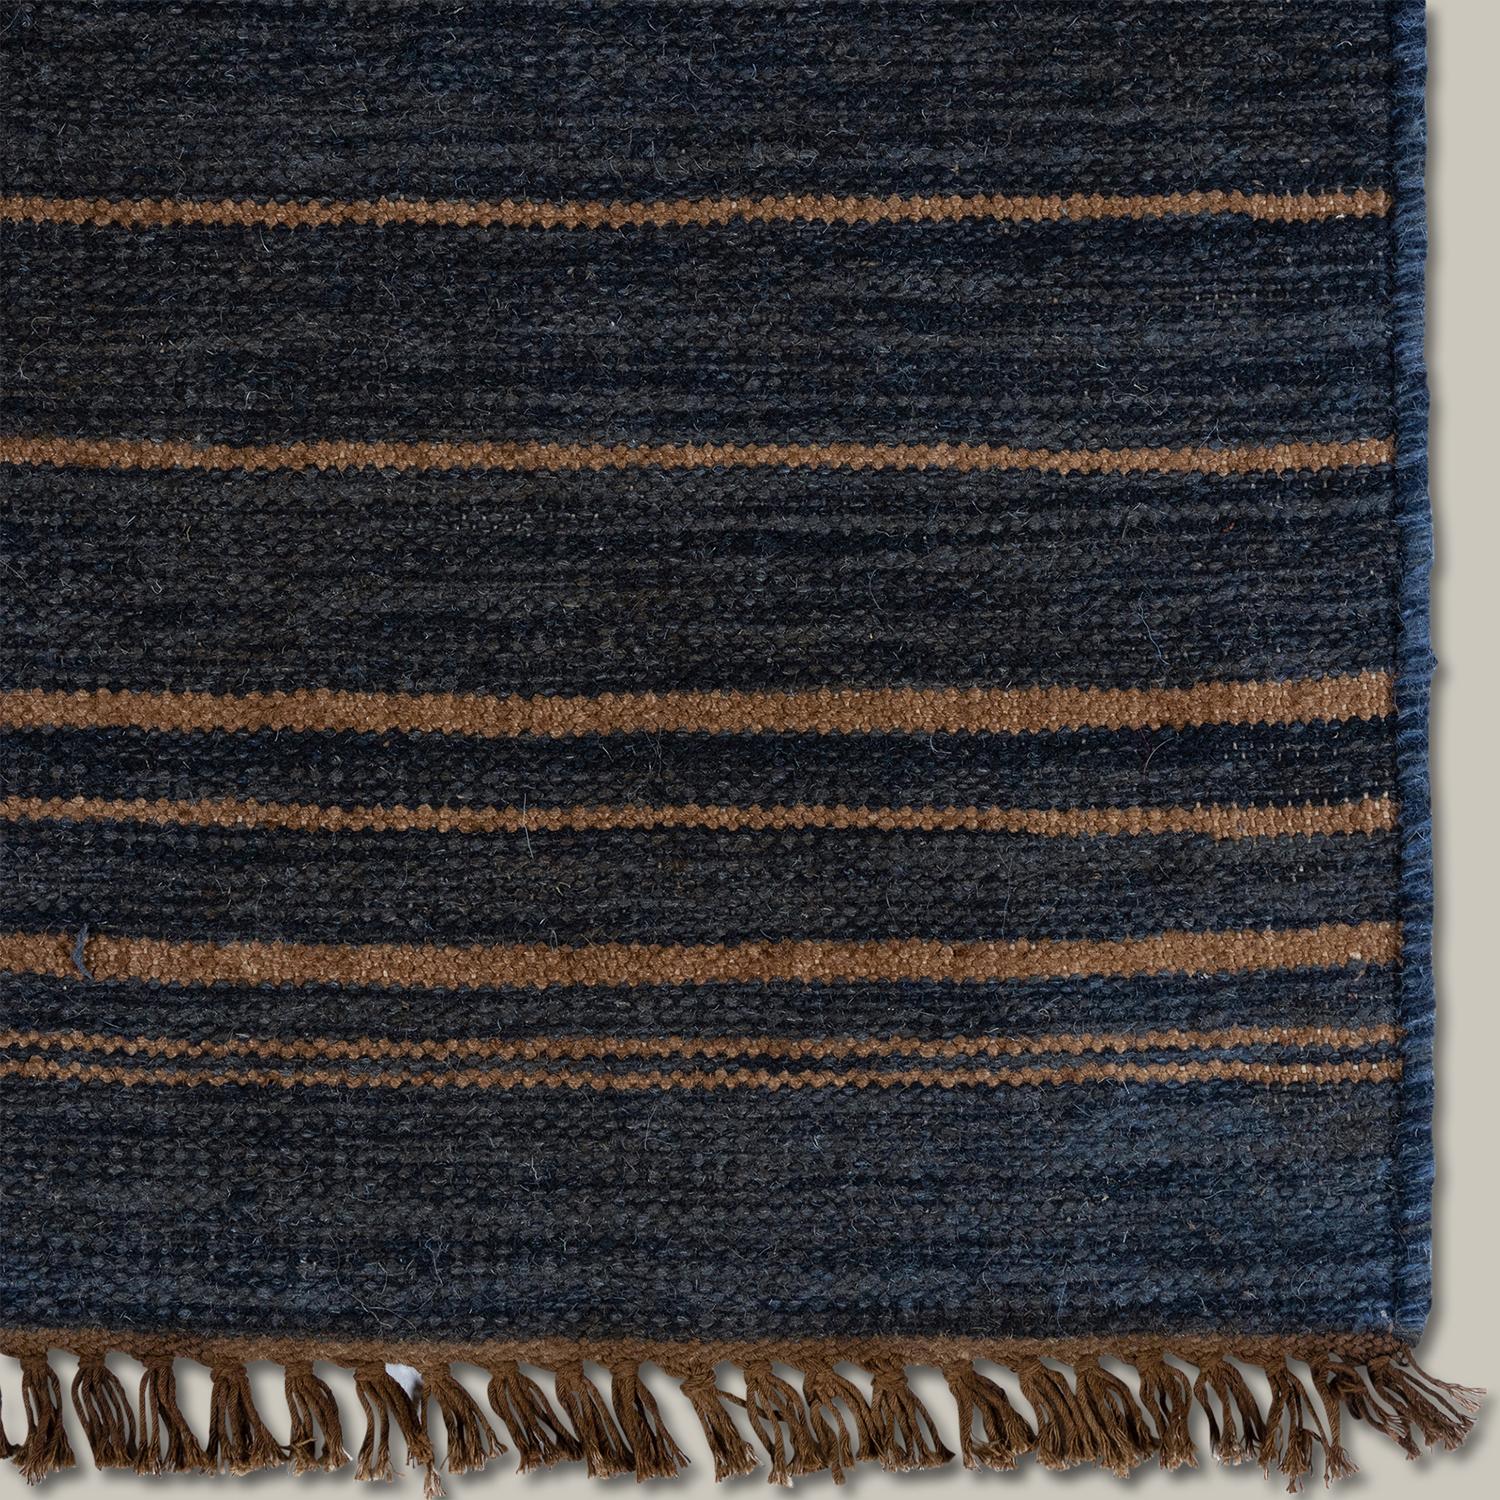 “Duar Tofola” Scandinavian Flatweave-Inspired Rug by Christiane Lemieux In New Condition For Sale In New York, NY